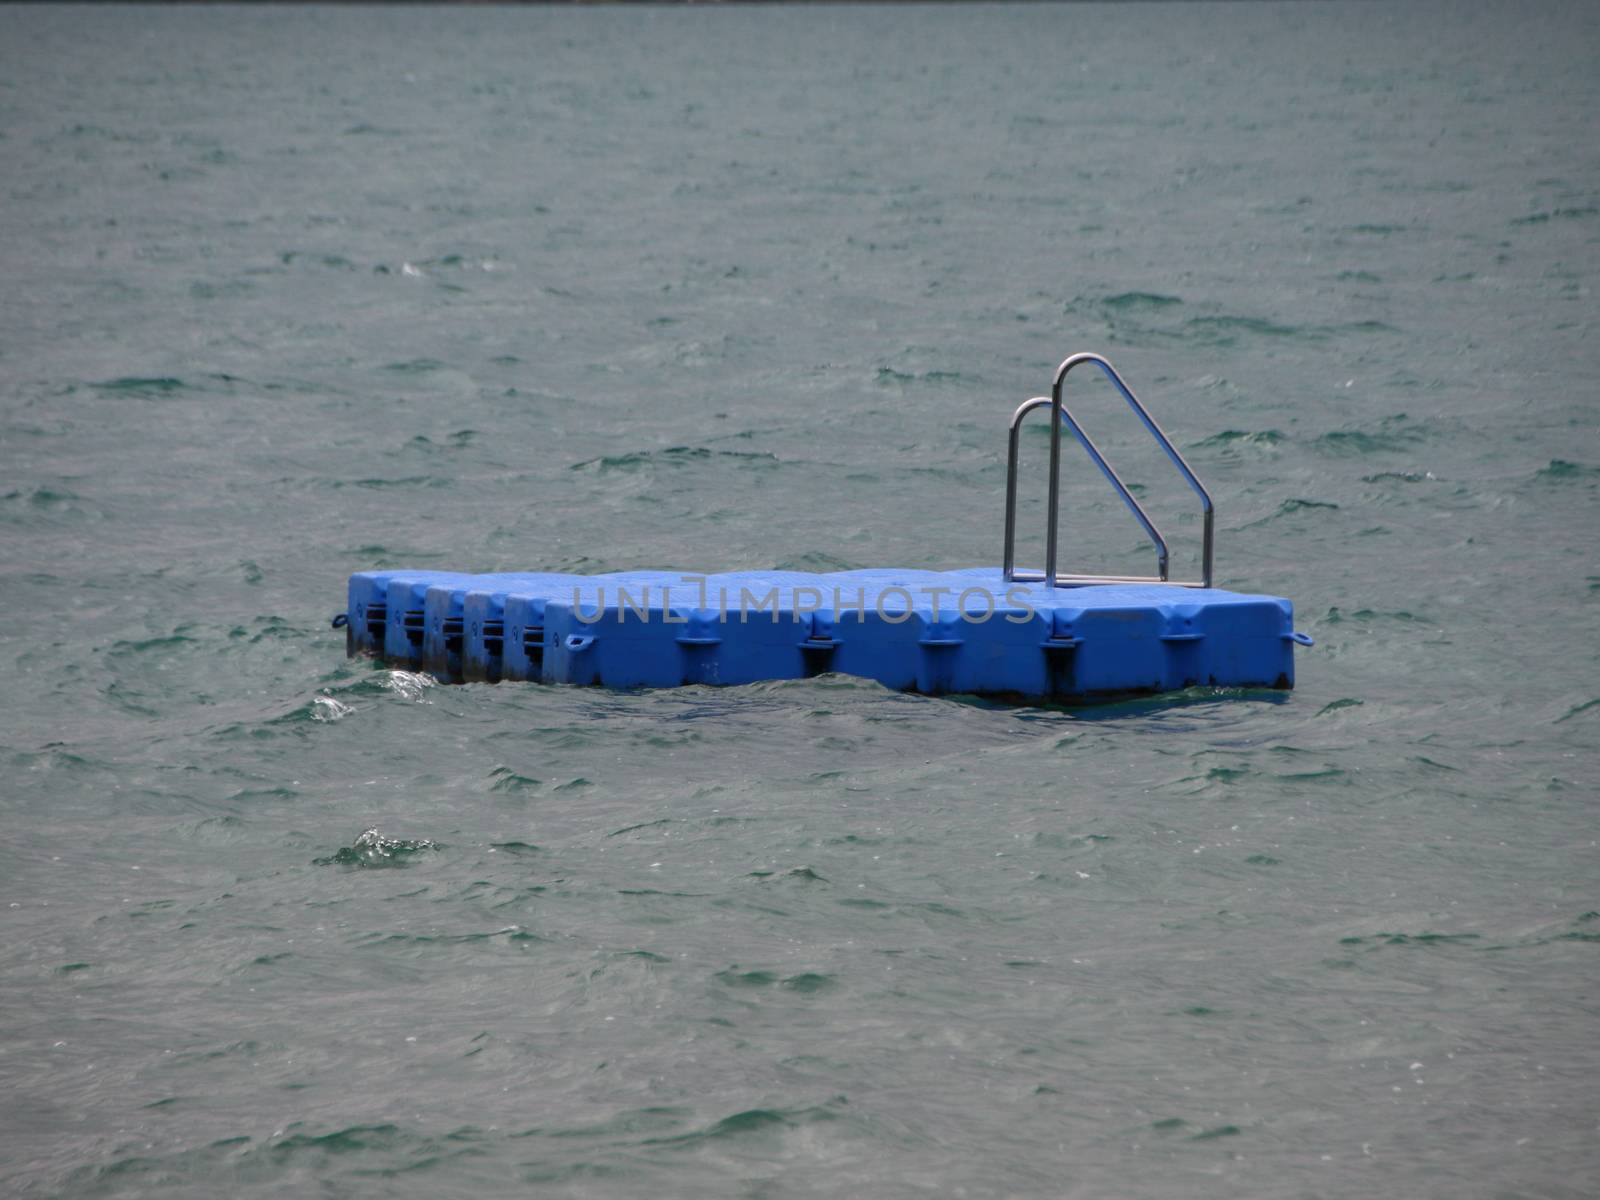 Isolated Blue Ponton Swimming Platform on Stormy Cold Water